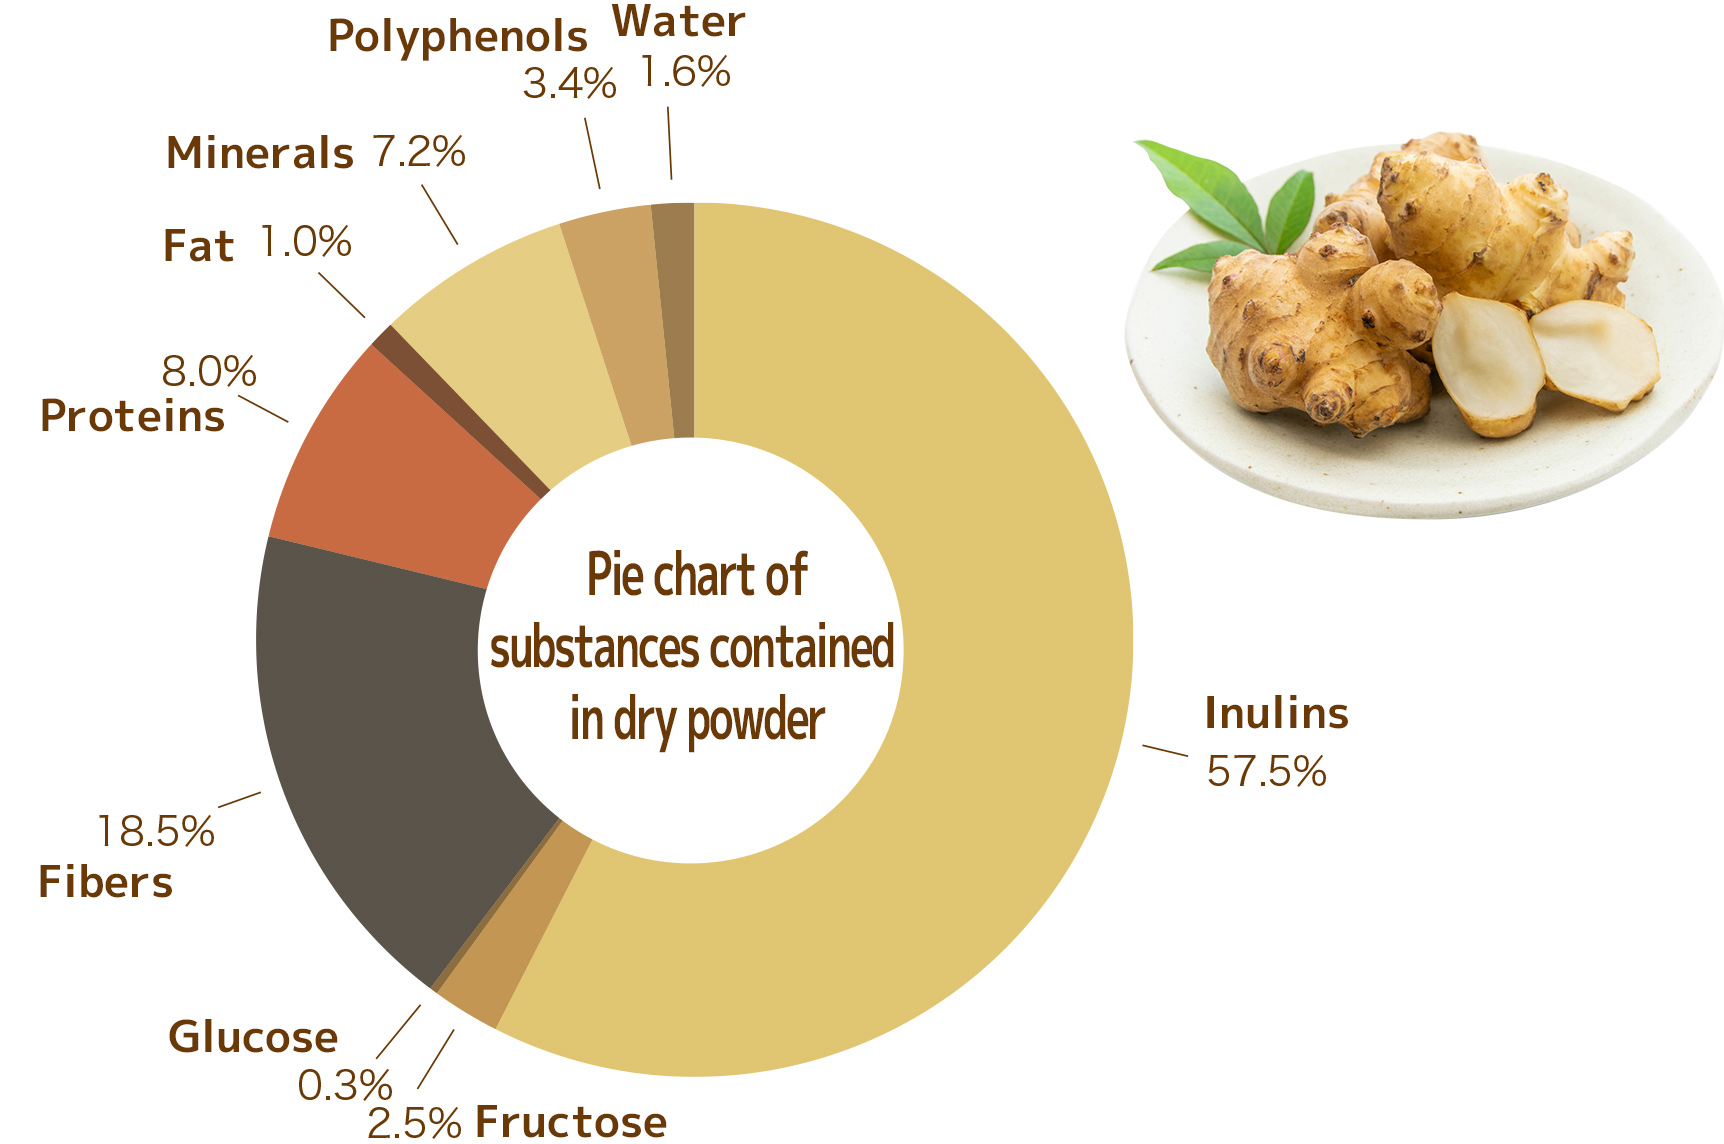 Pie chart of substances contained in dry powder